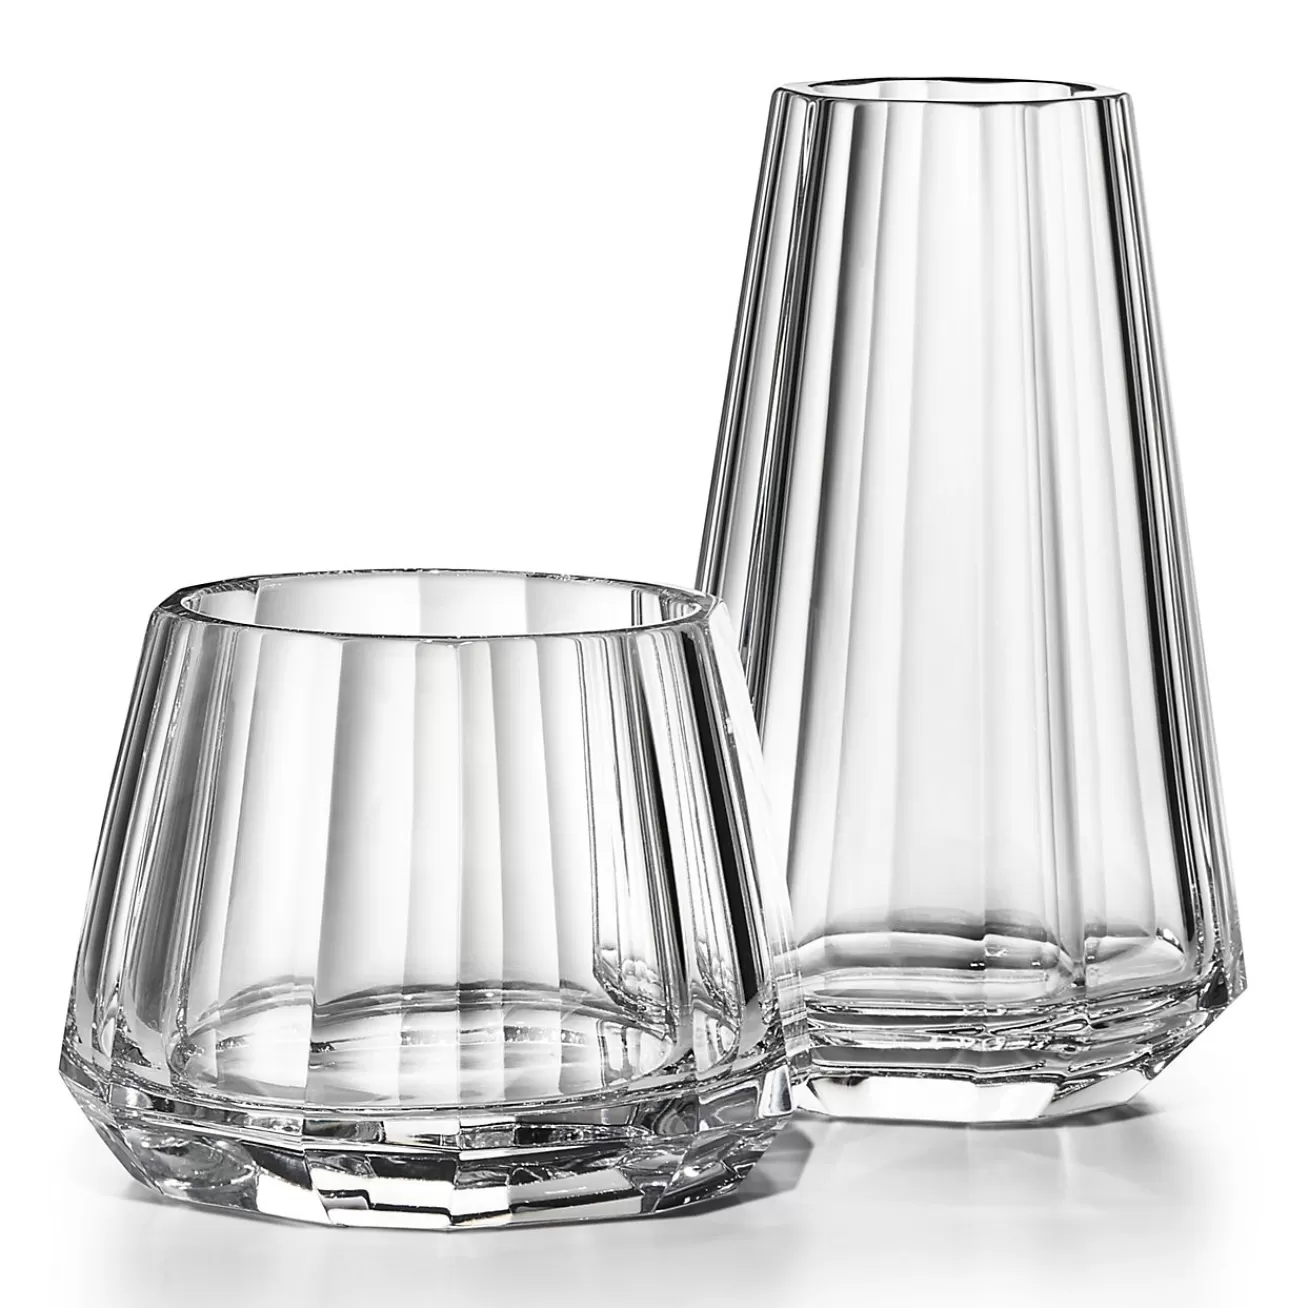 Tiffany & Co. Tiffany Facets Wide Tapered Vase in Lead Crystal Glass | ^ The Home | Housewarming Gifts